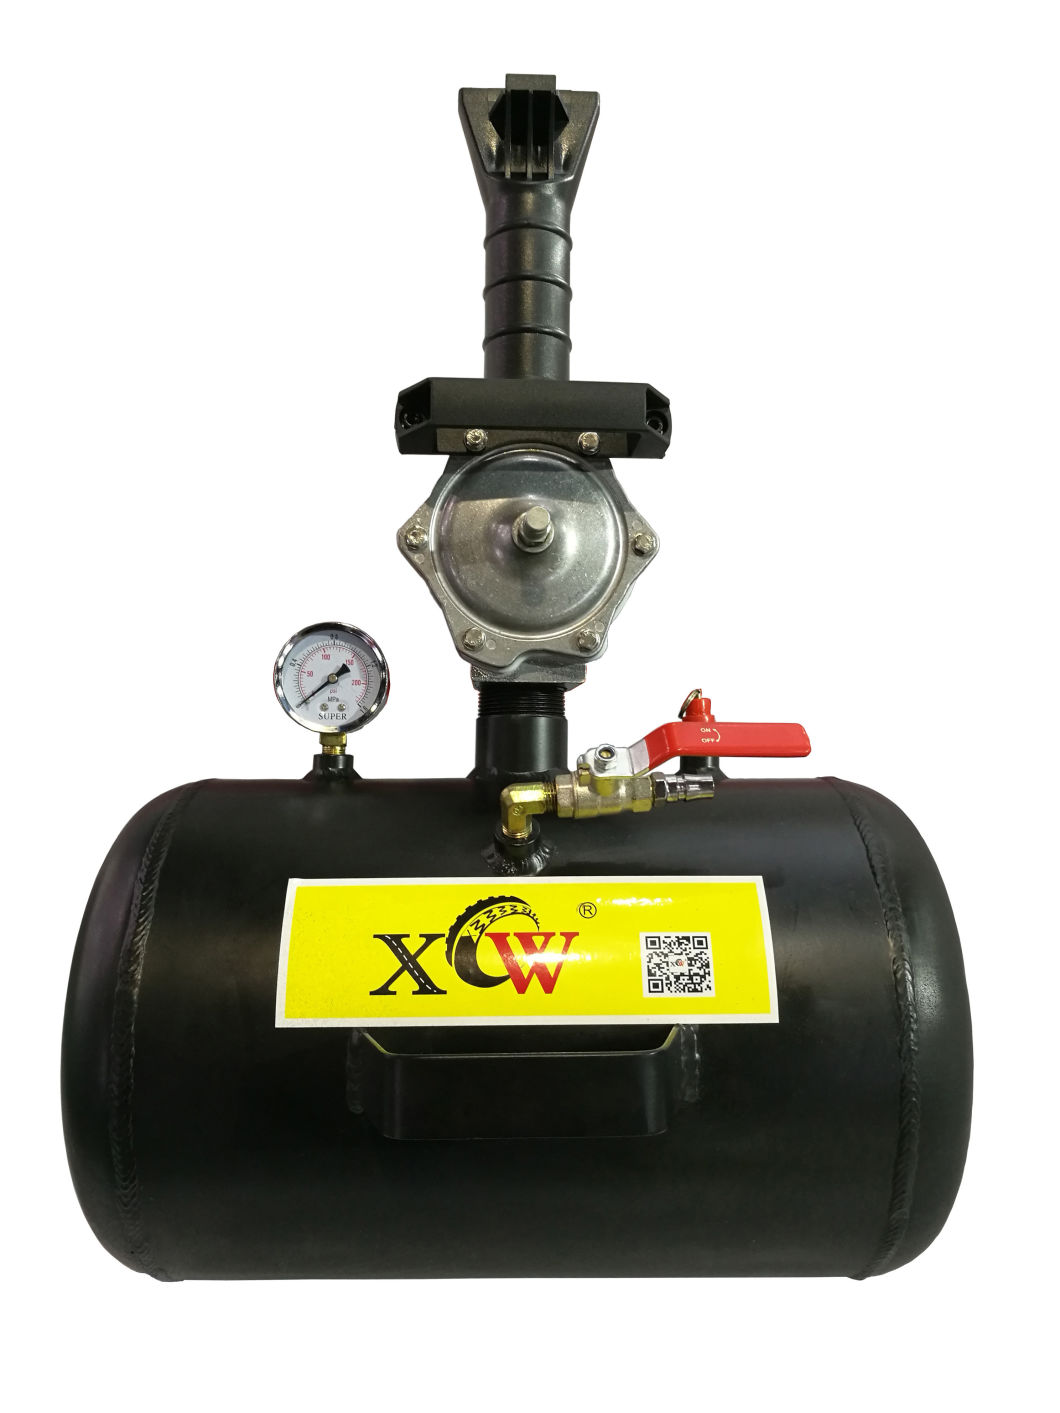 Xw-5 Tire Bead Seater, Tire Bead Booster